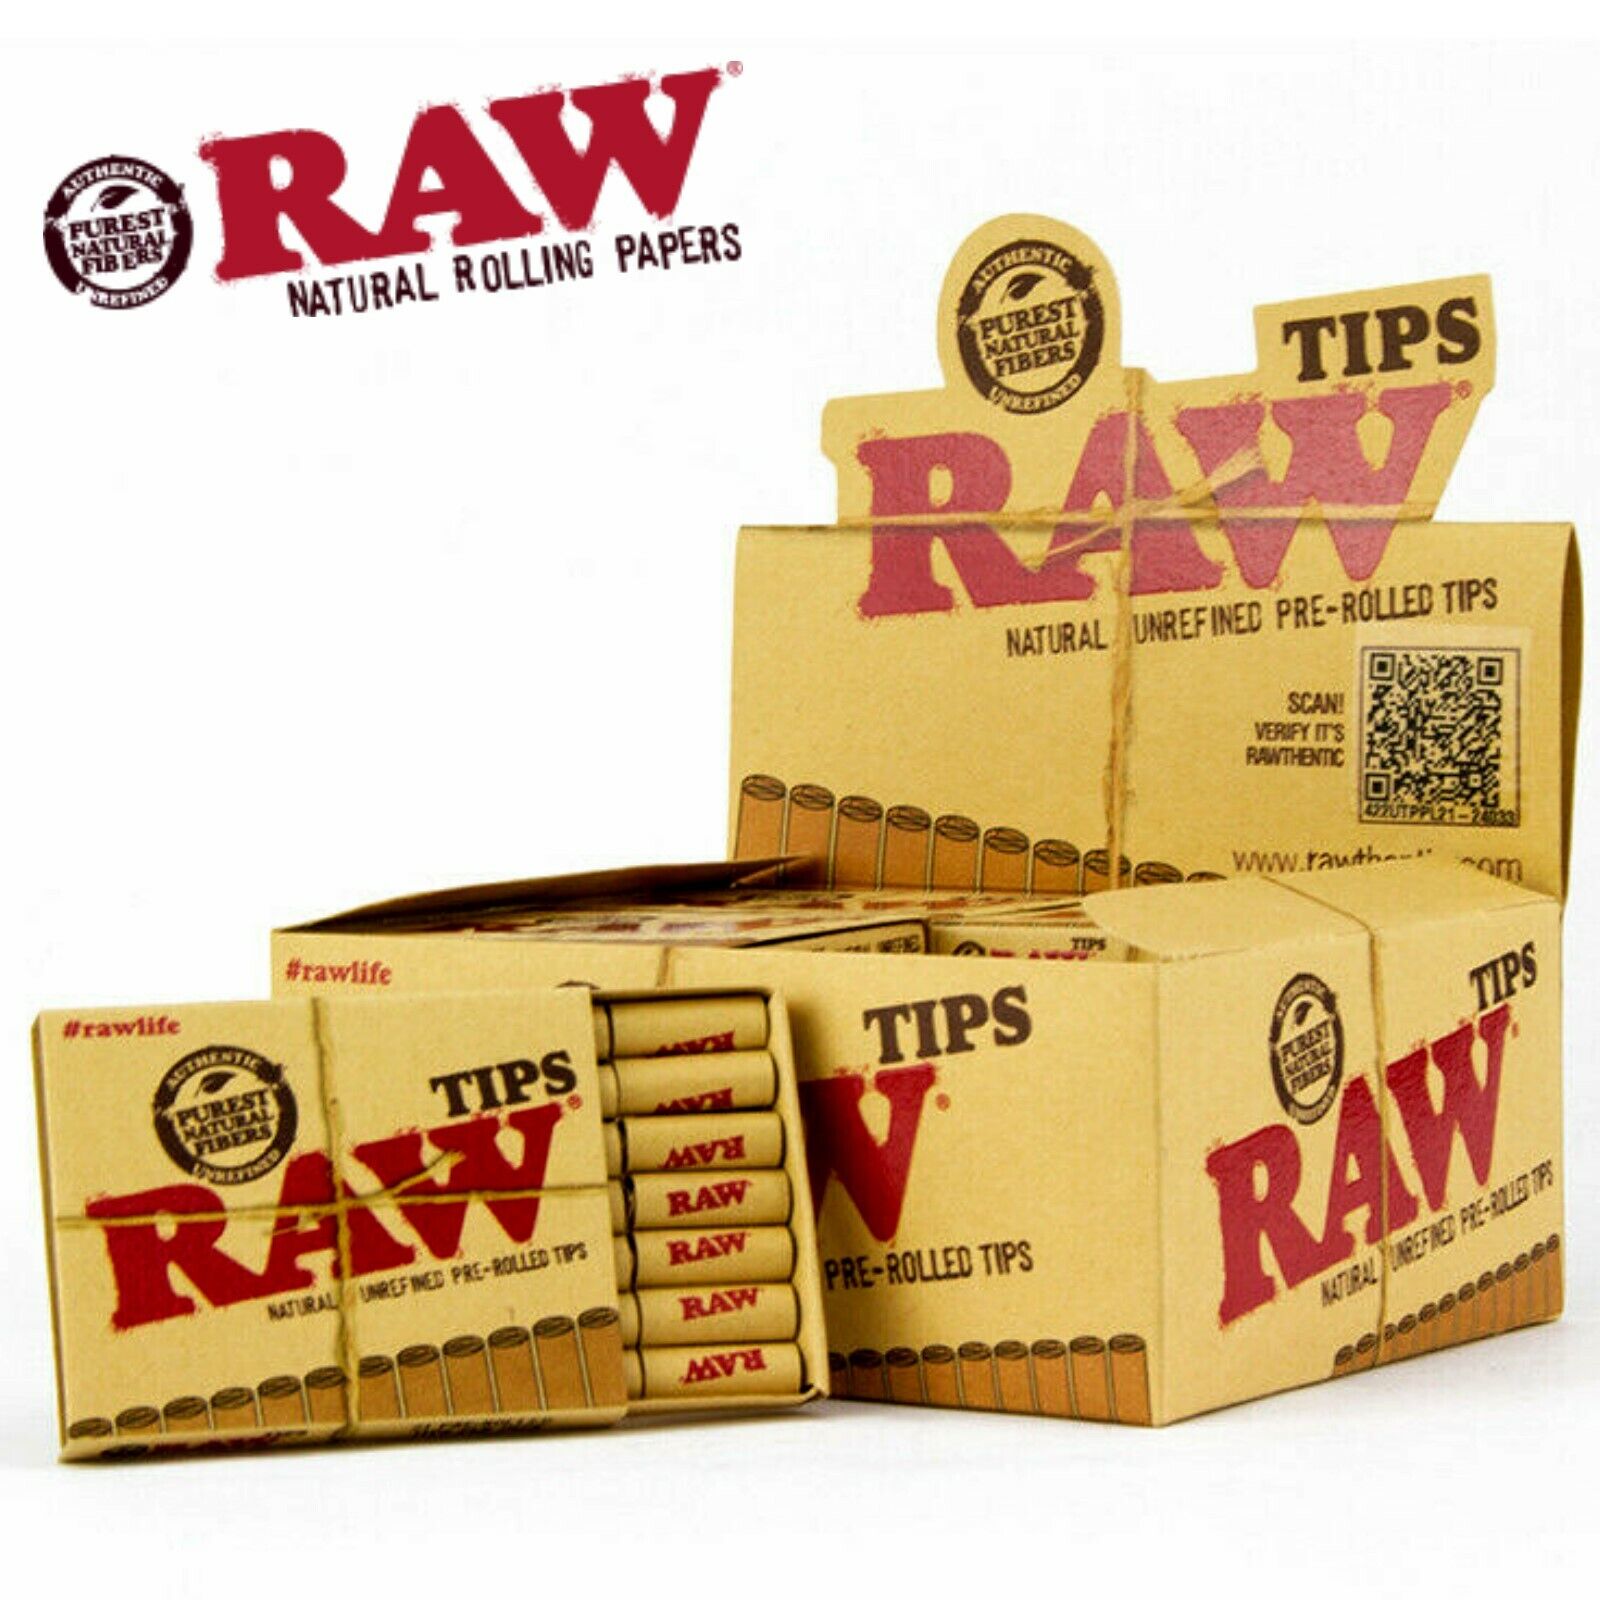 Full Box 20 Packs Raw Natural Unrefined Pre-Rolled Tips 21 Per Box - 420 Total